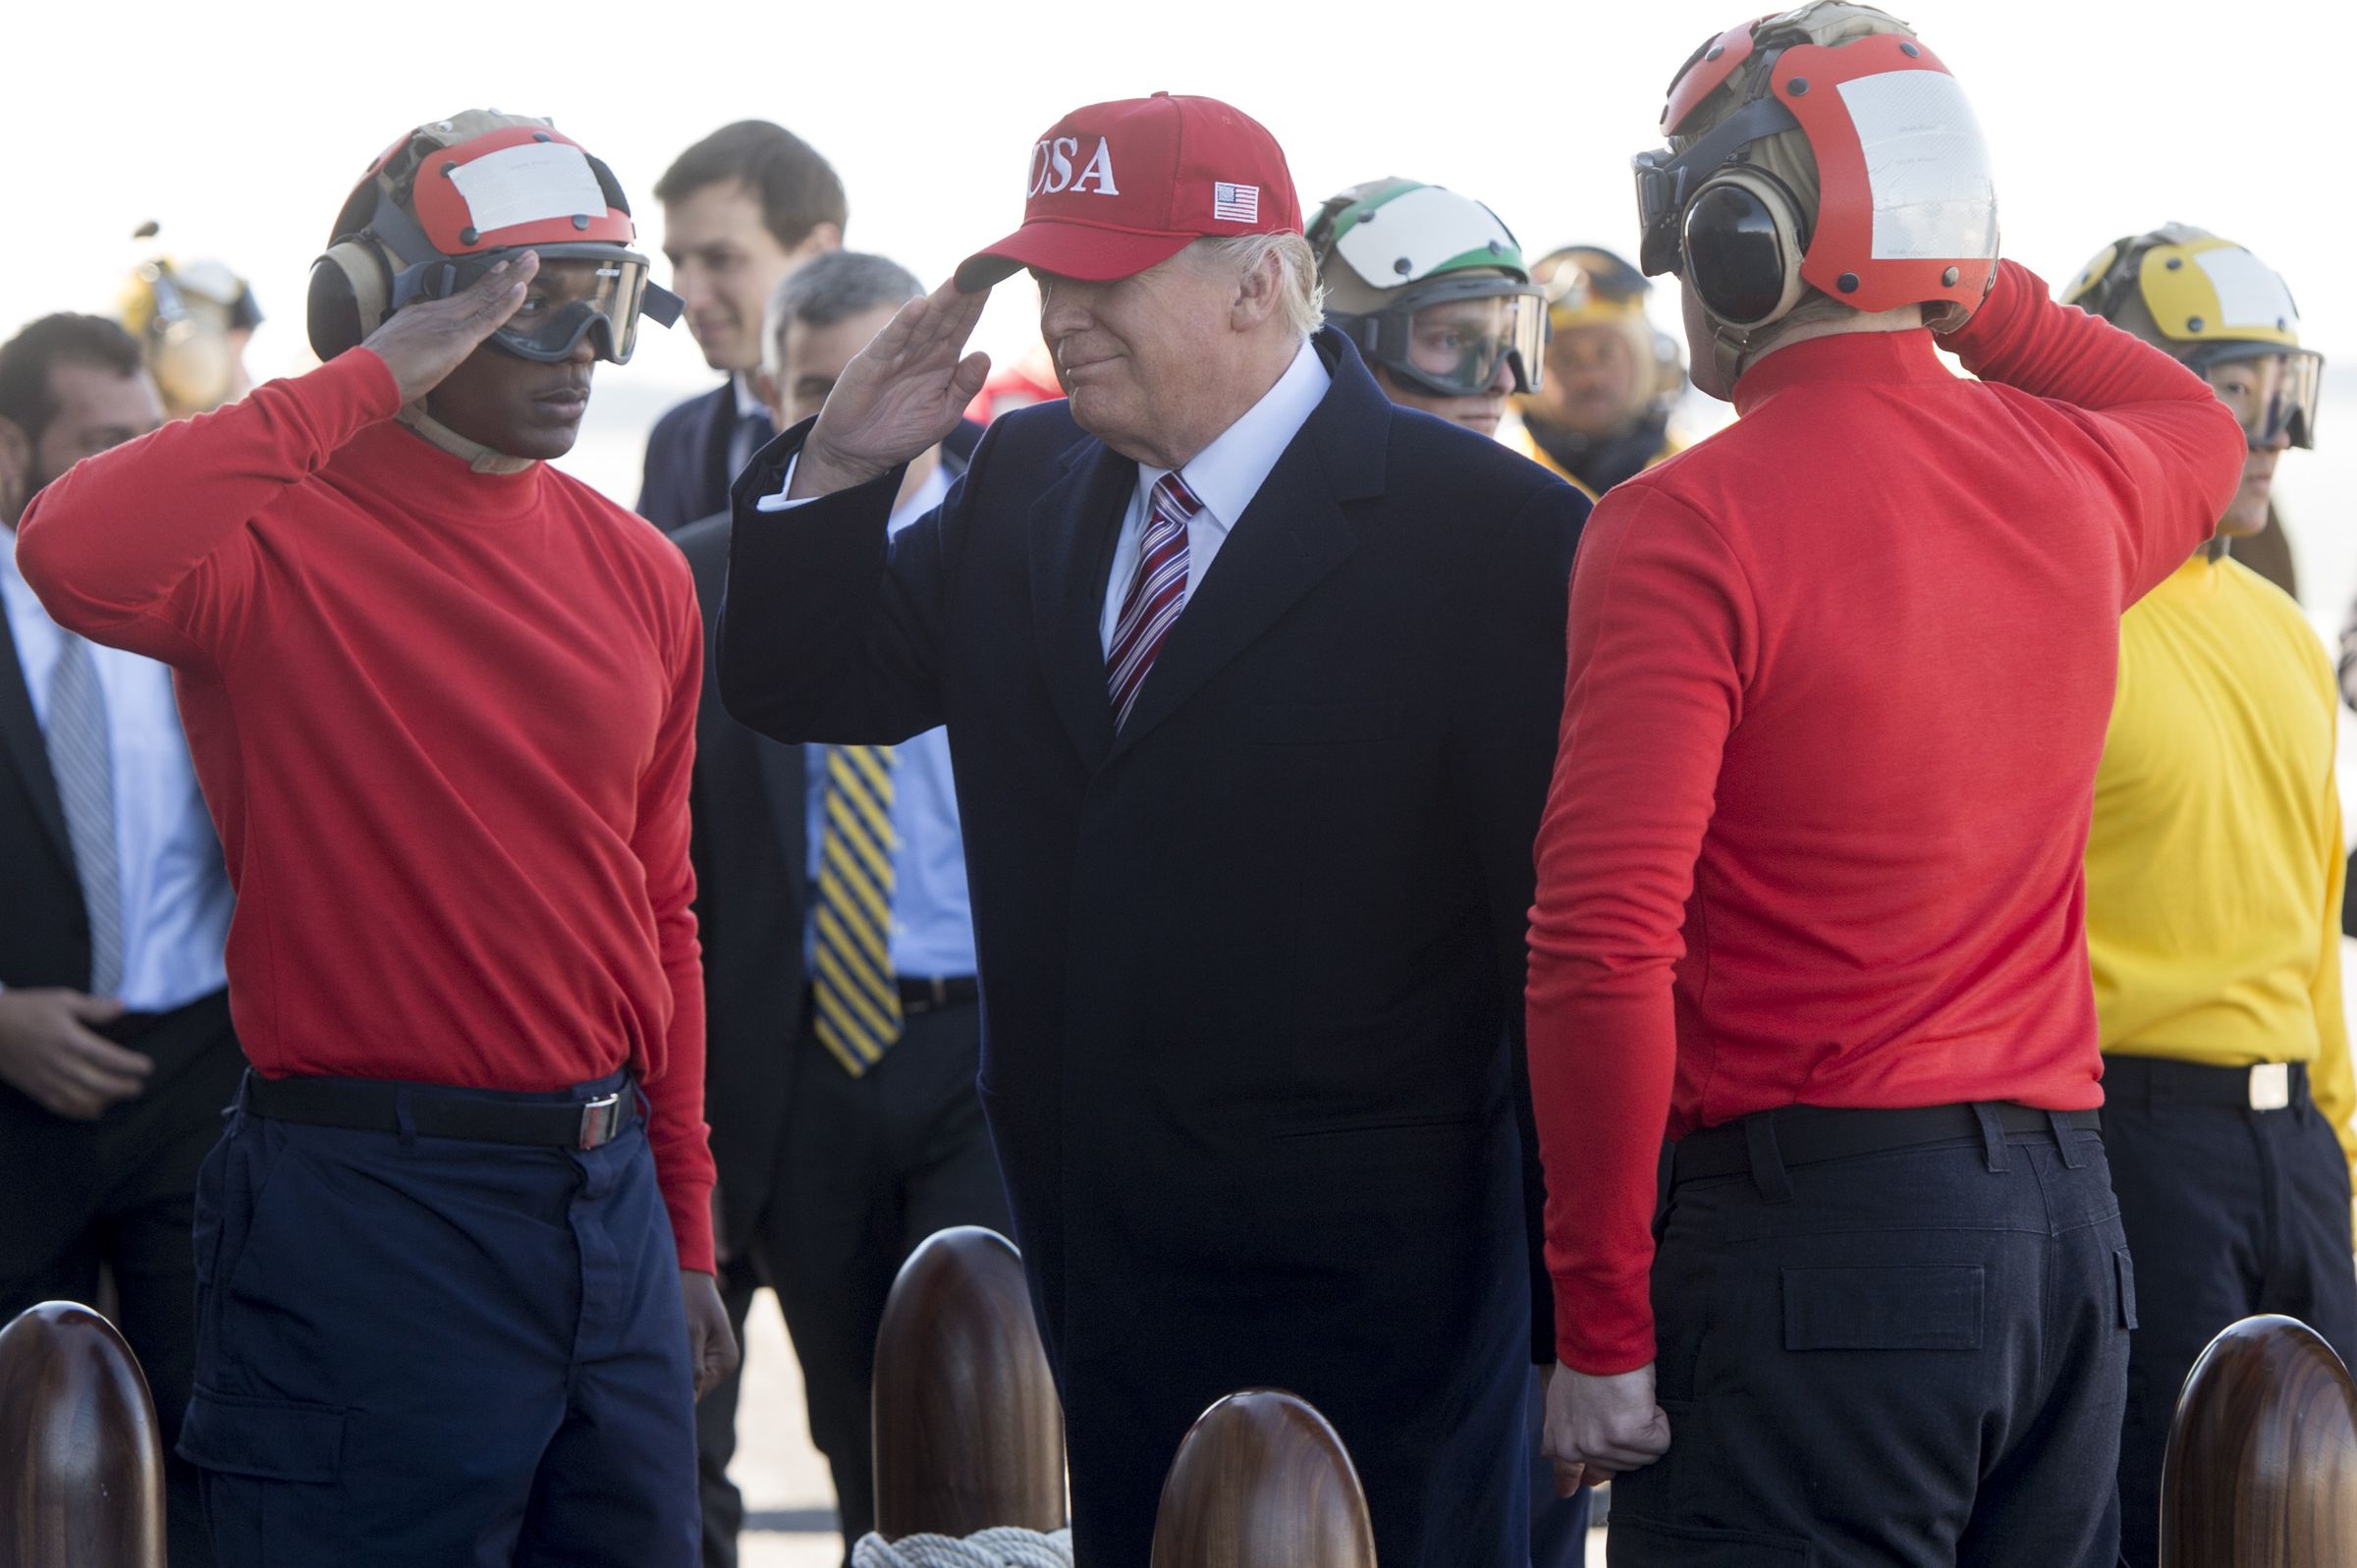 US President Donald Trump arrives onboard the flight deck of the pre-commissioned USS Gerald R. Ford aircraft carrier in Newport News, Virginia, March 2, 2017. / AFP PHOTO / SAUL LOEB